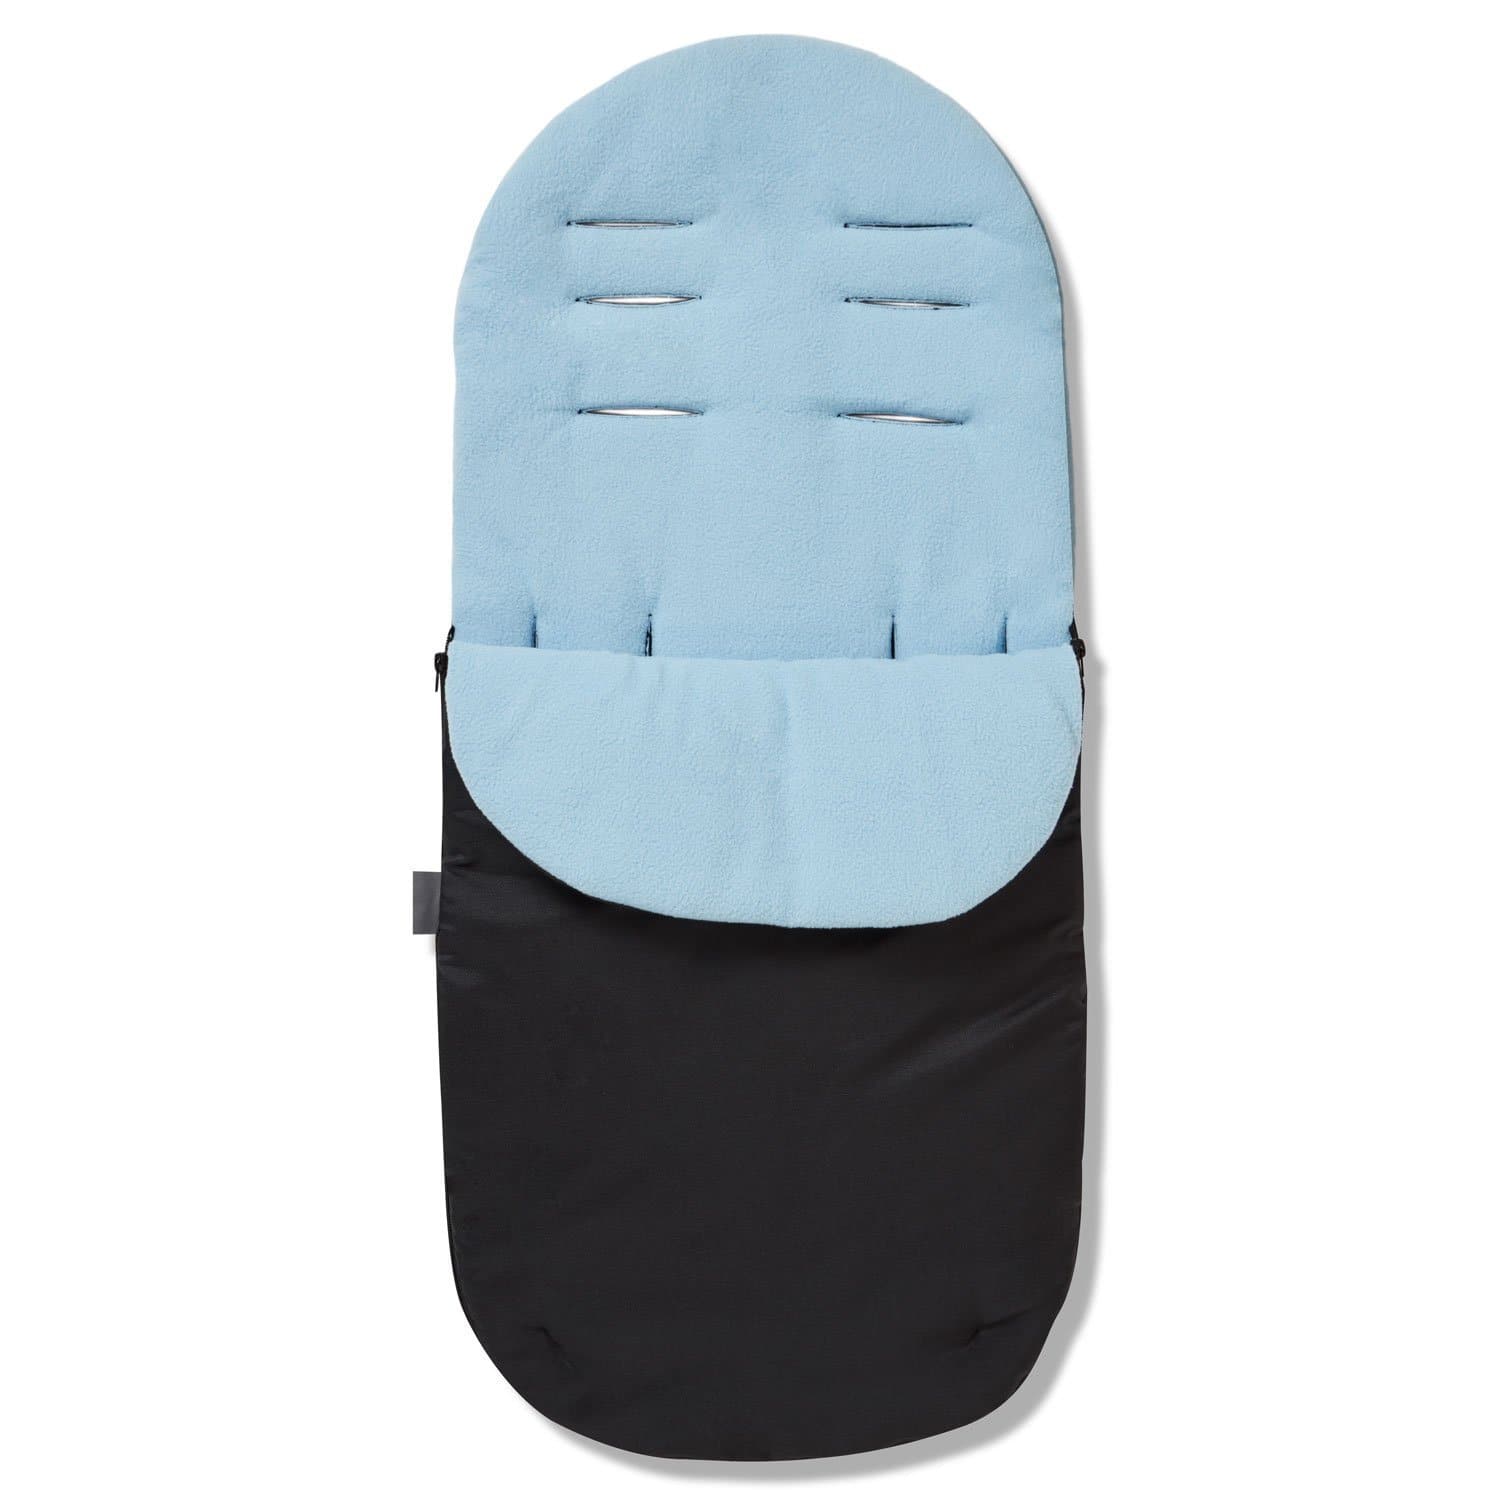 Footmuff / Cosy Toes Compatible with Brio - Light Blue / Fits All Models | For Your Little One